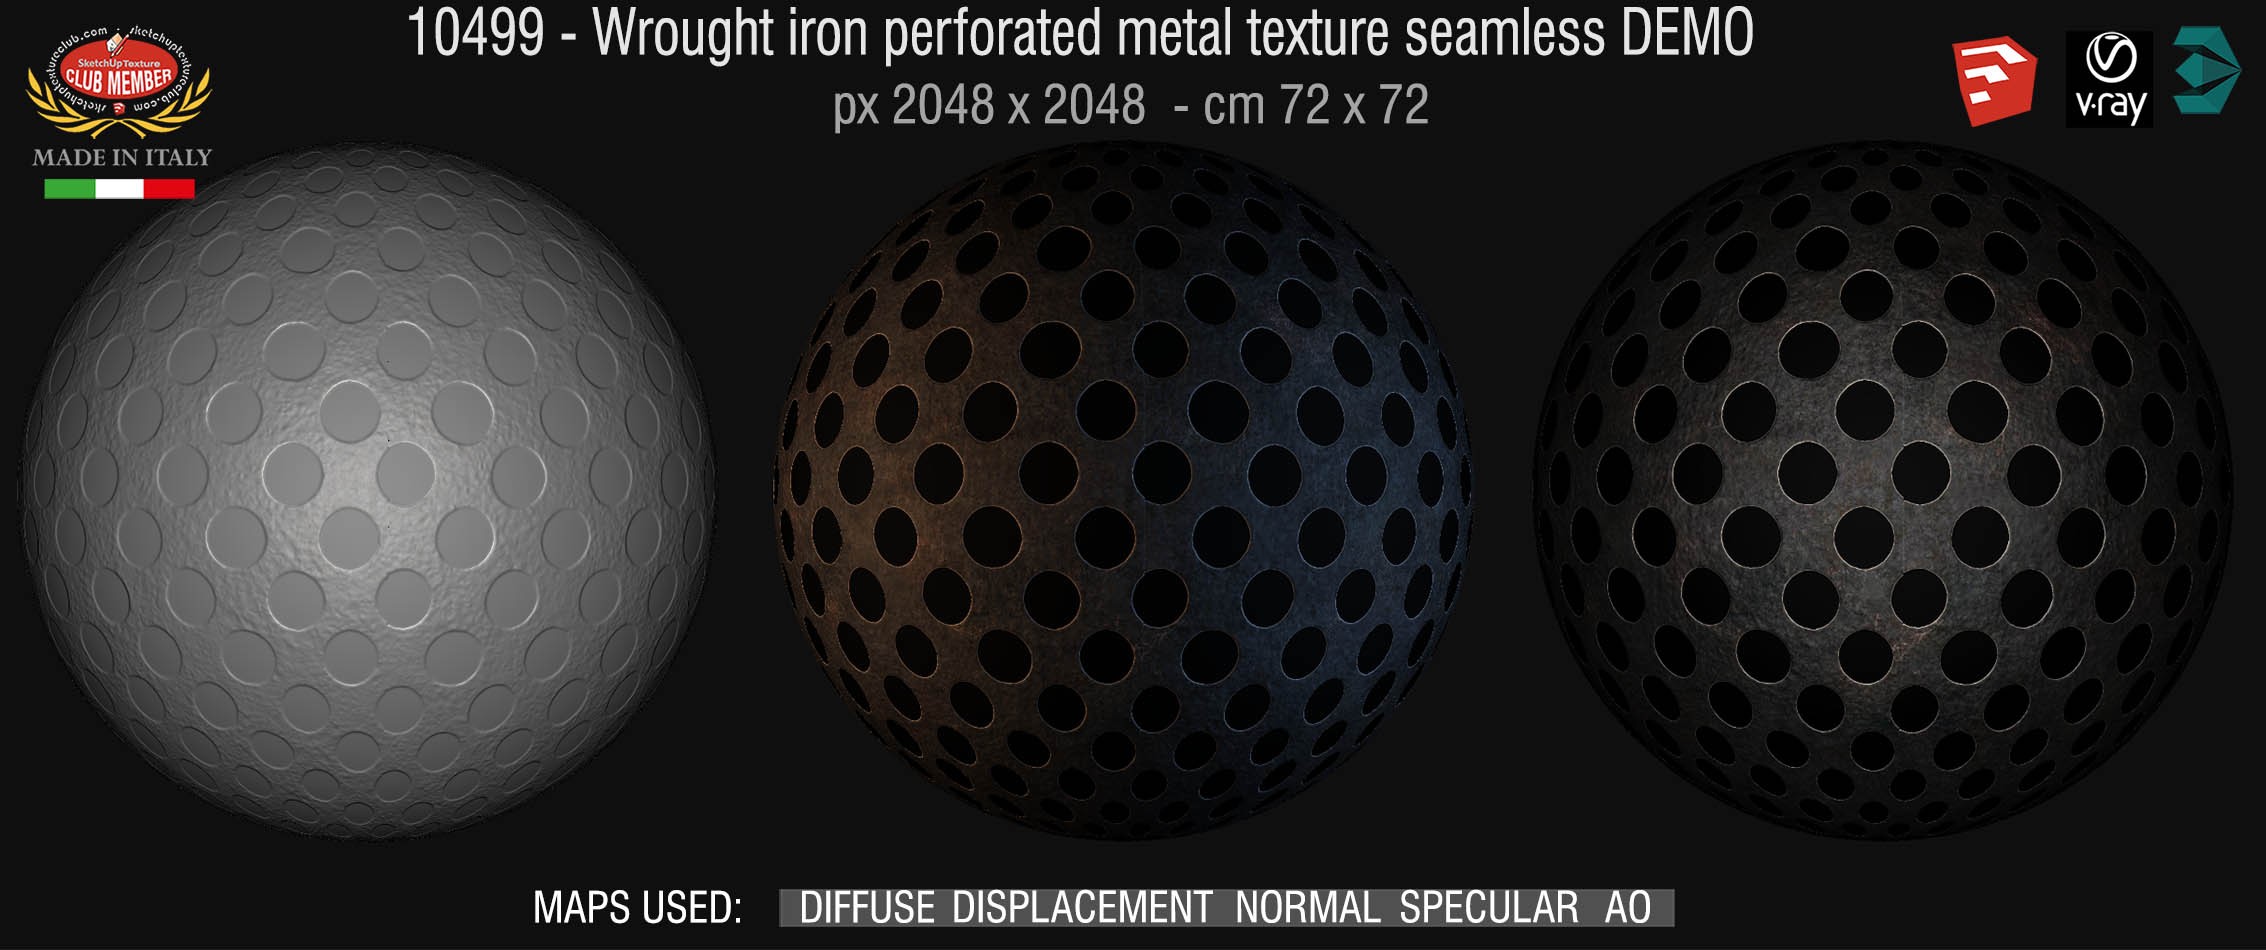 10499 HR Wrought iron perforated metal texture seamless + maps DEMO